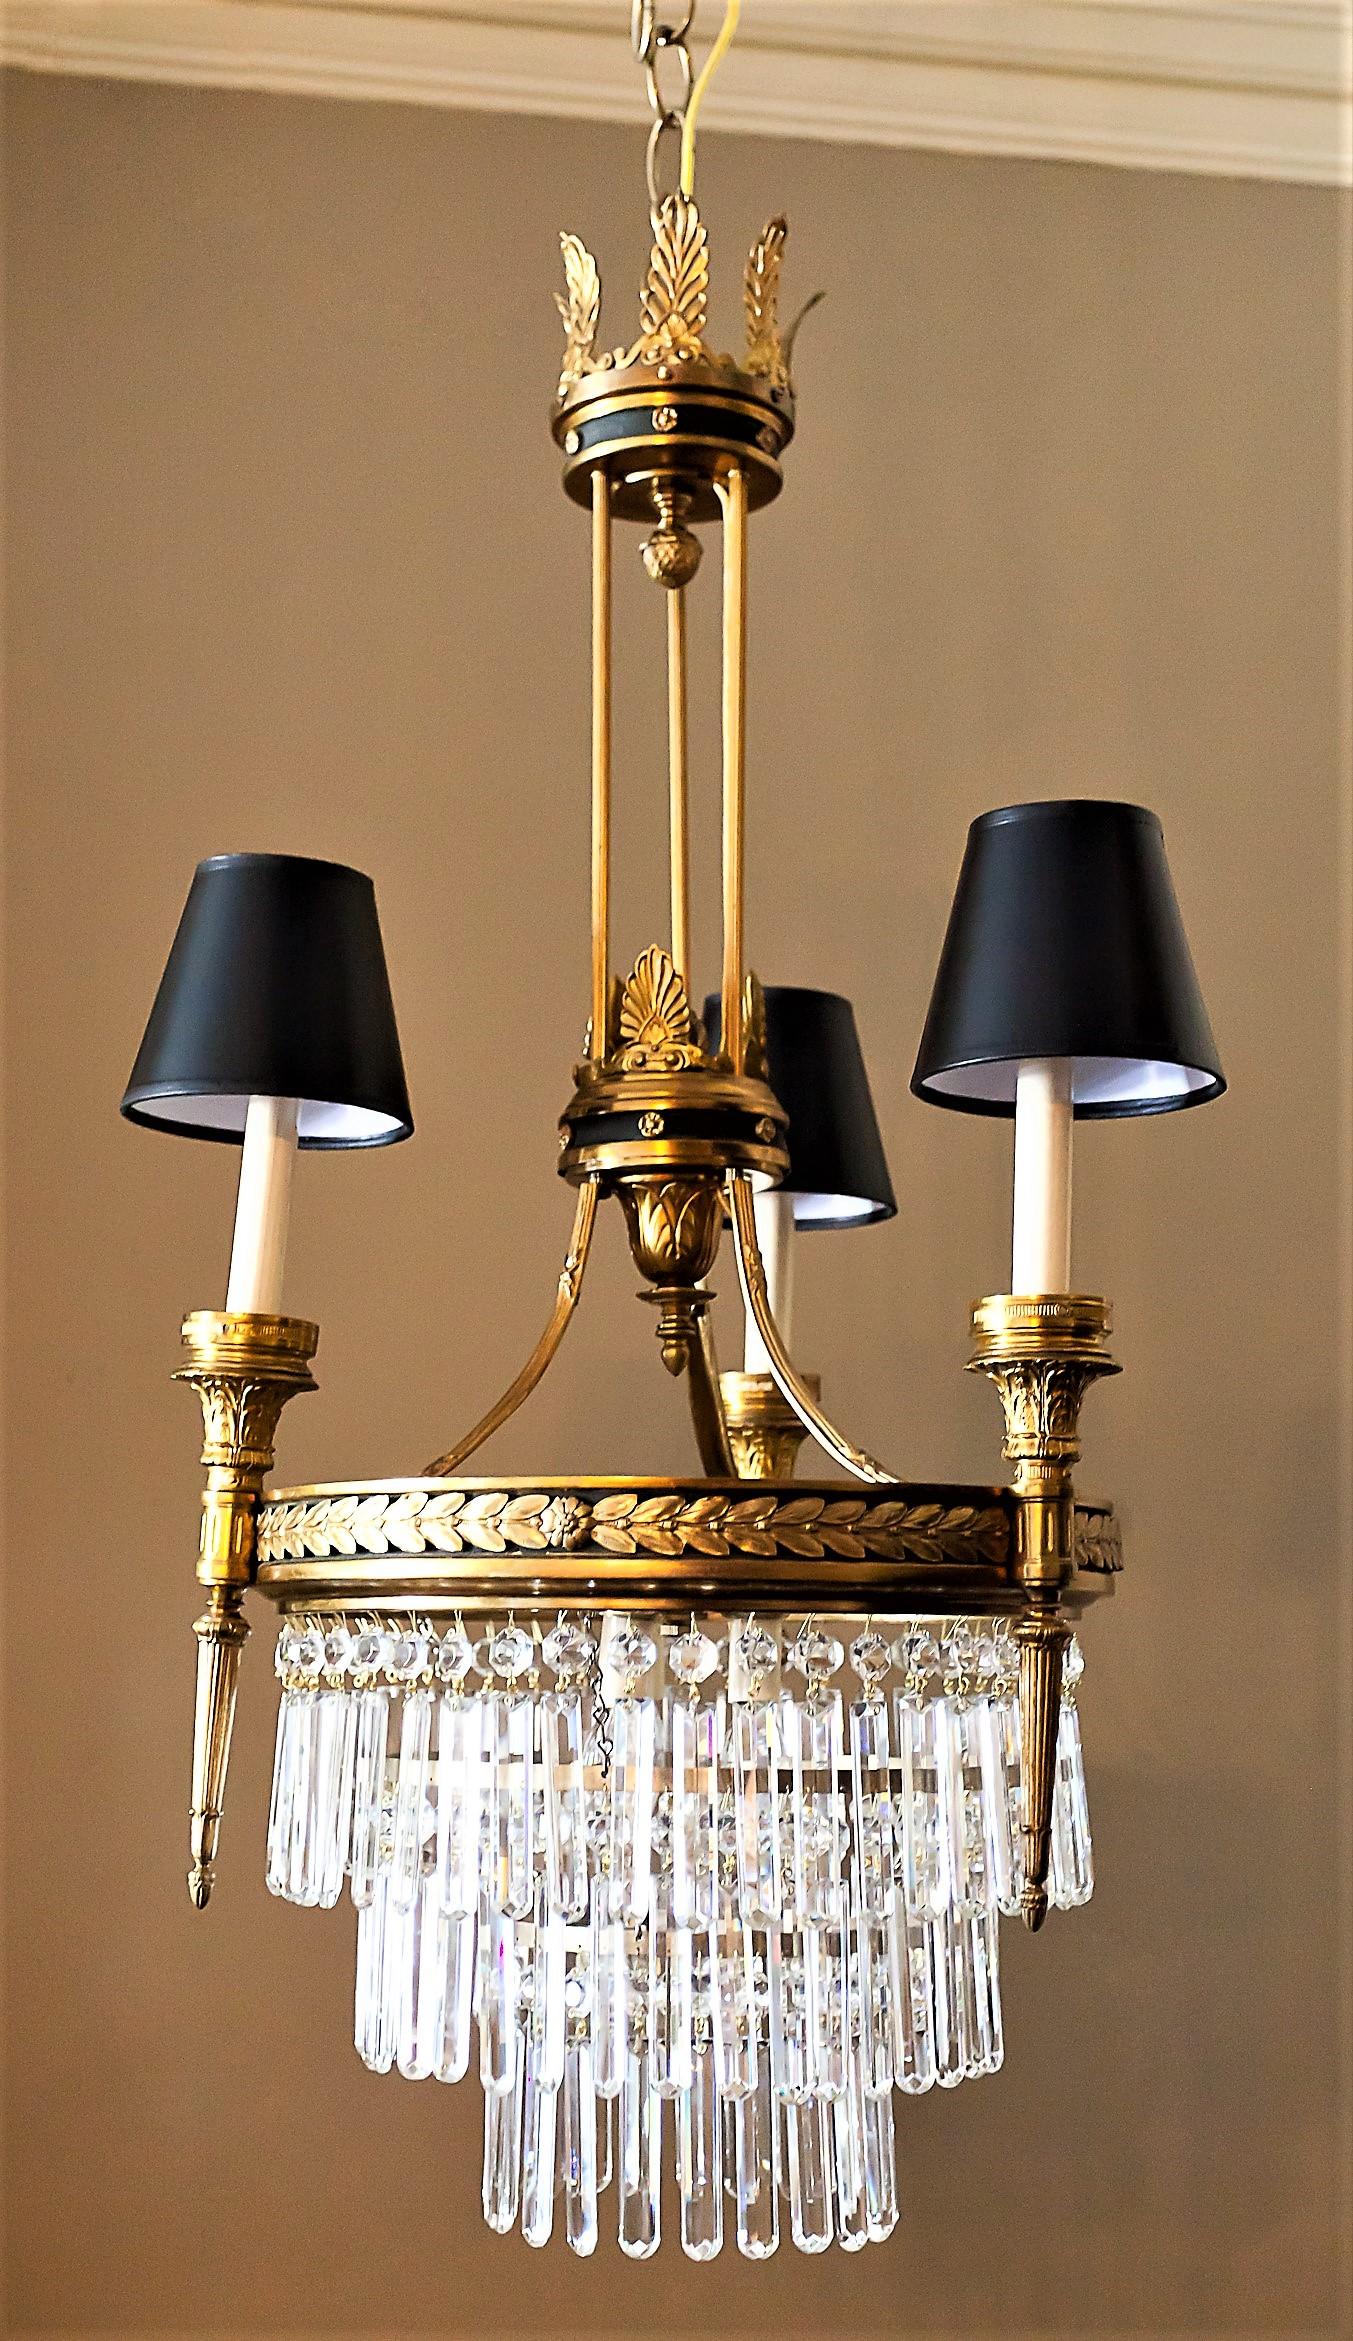 This Belle Époque/Edwardian chandelier has three external torchere-style lights with shades and three internal lights. Hand-cast gilt and patinated brass. Laurel leaf garland band. Three black parchment shades, hanging hardware, ceiling cap, and one